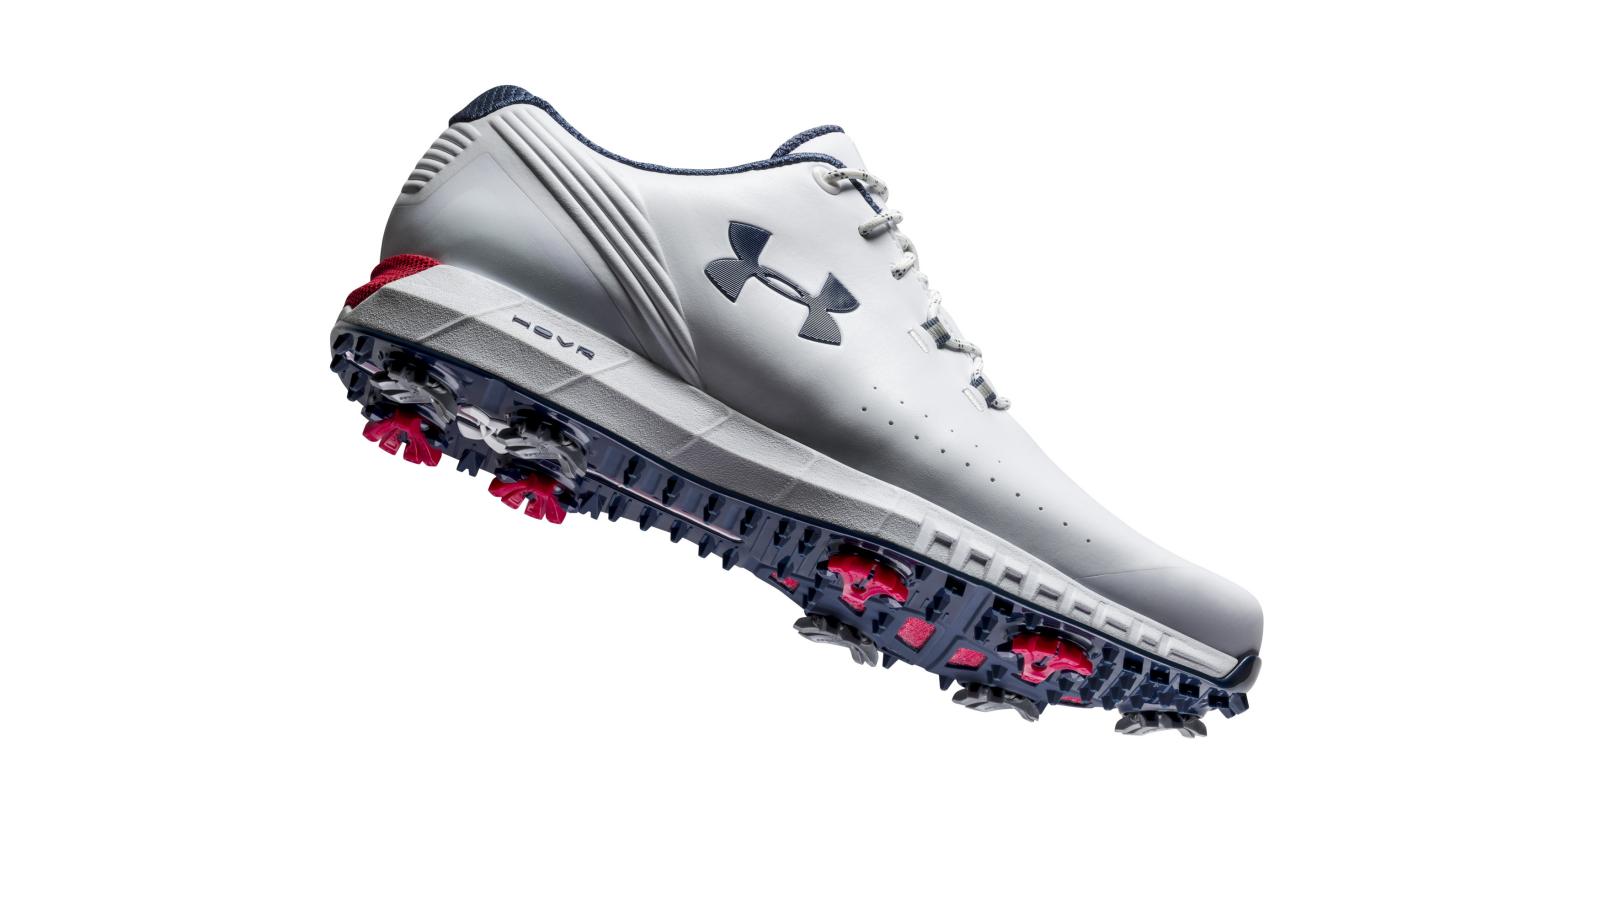 Under Armour launches HOVR Drive golf shoe